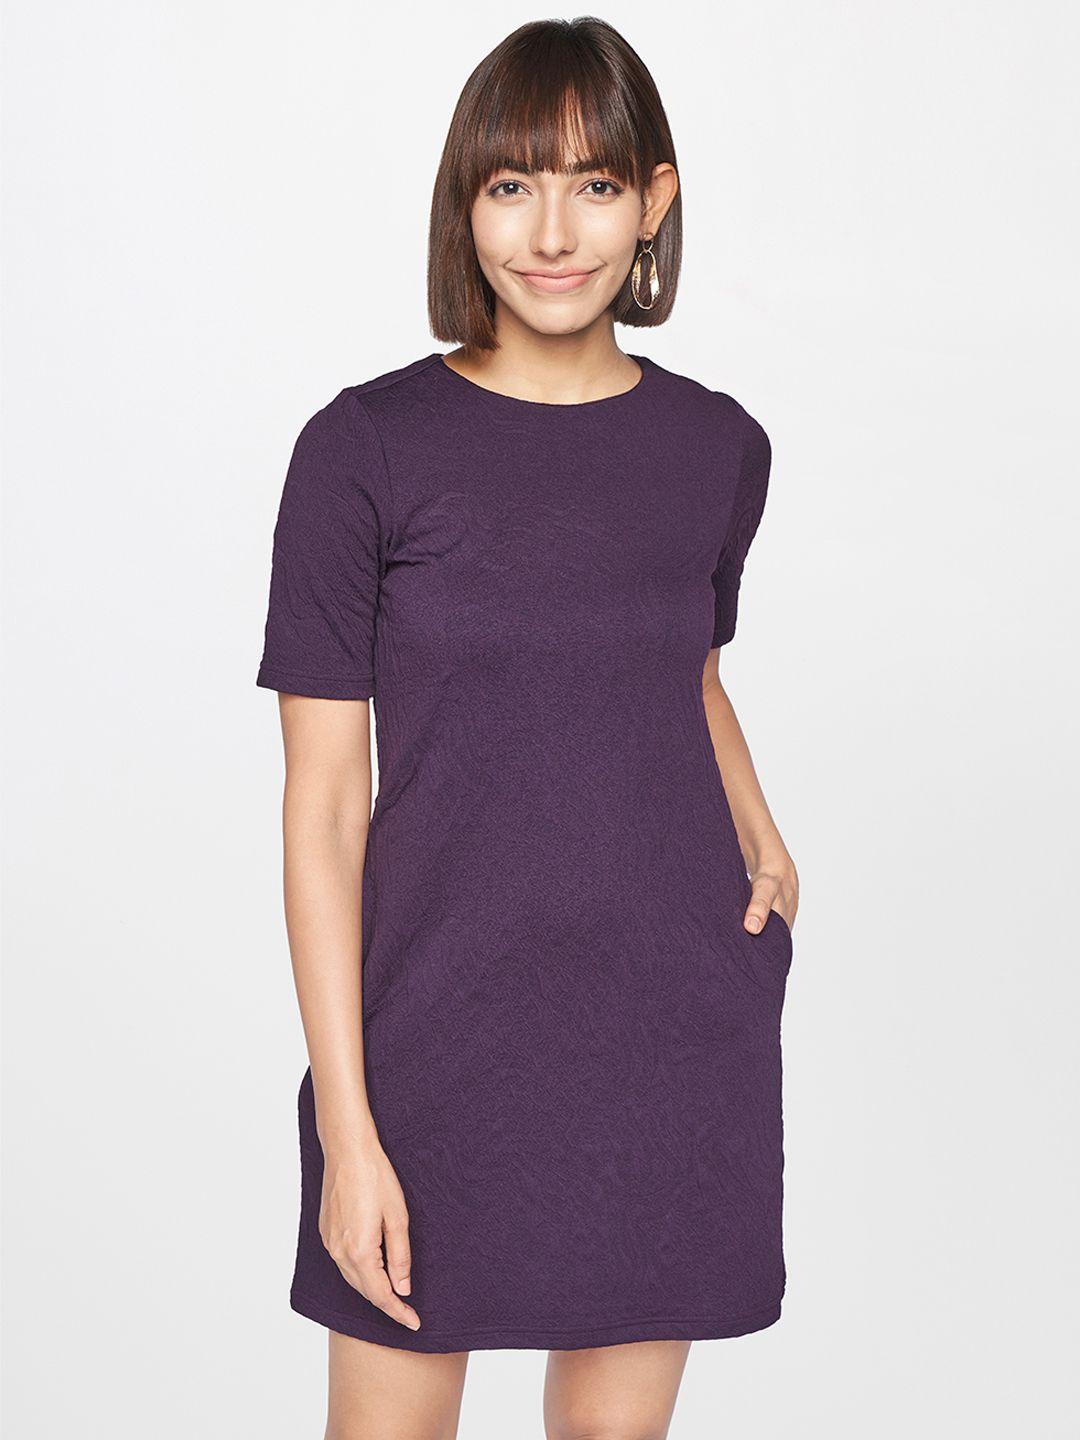 and-violet-self-design-bodycon-dress